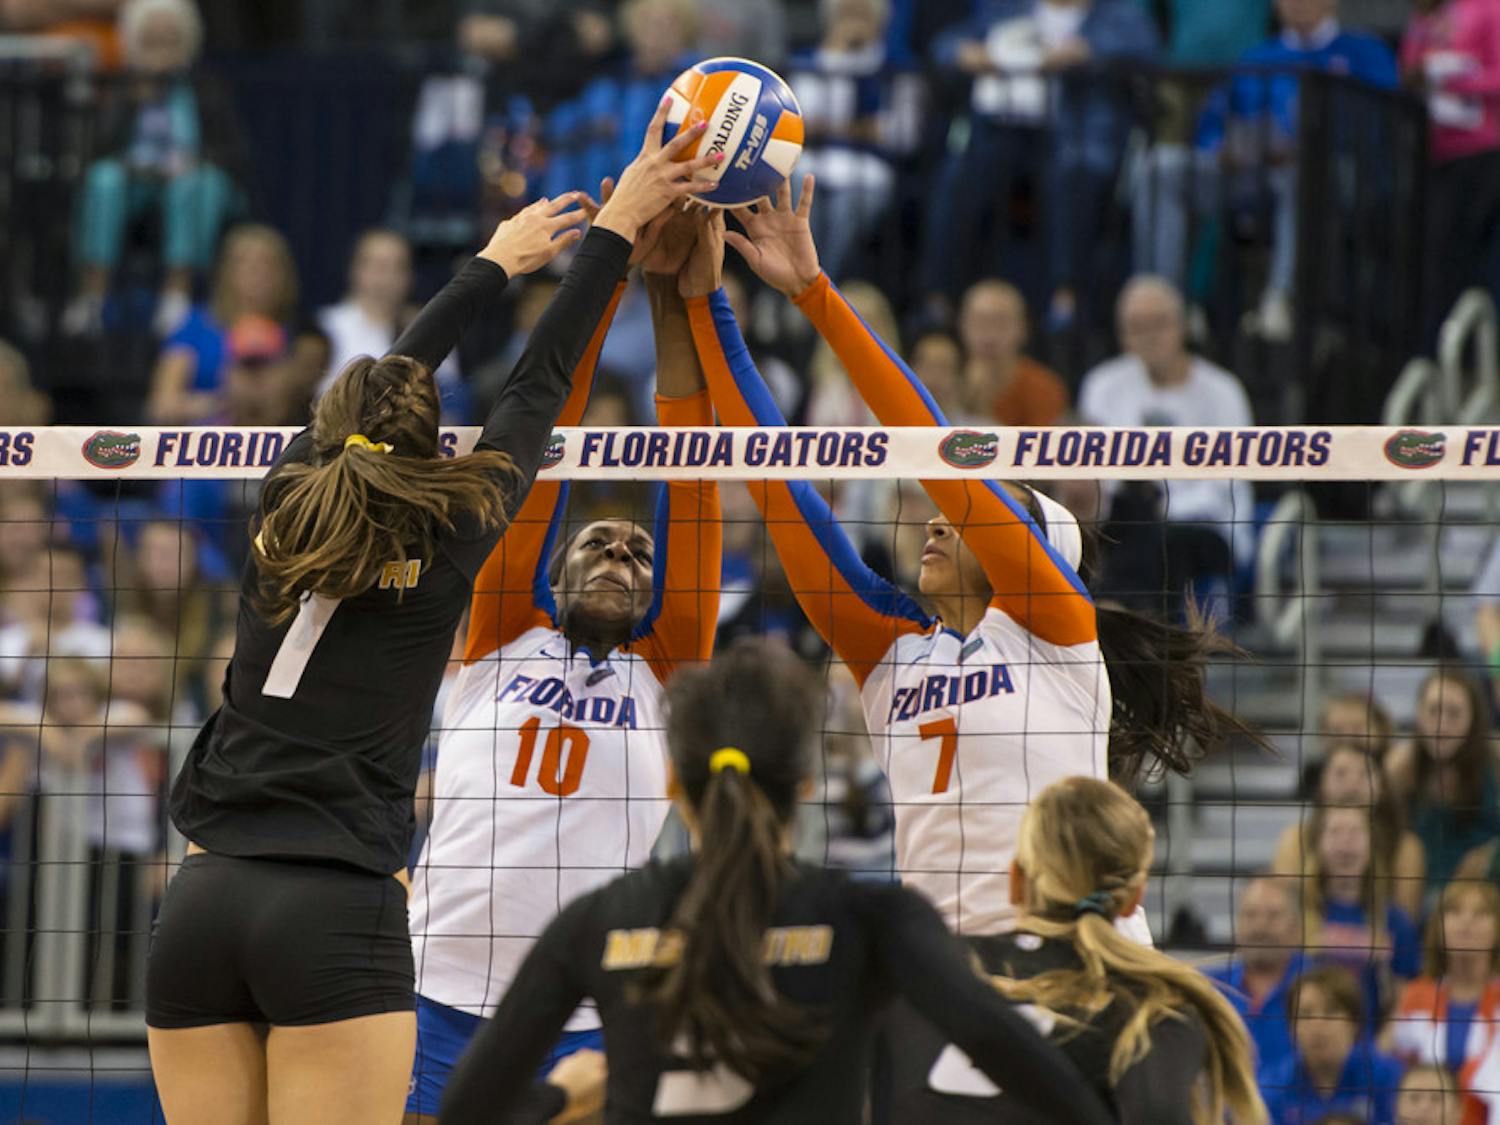 Chloe Mann and Gabby Mallette try to fend off match point against Missouri's Molly Kreklow during the Gators' 3-0 loss to the Tigers on Friday night in the O'Connell Center.